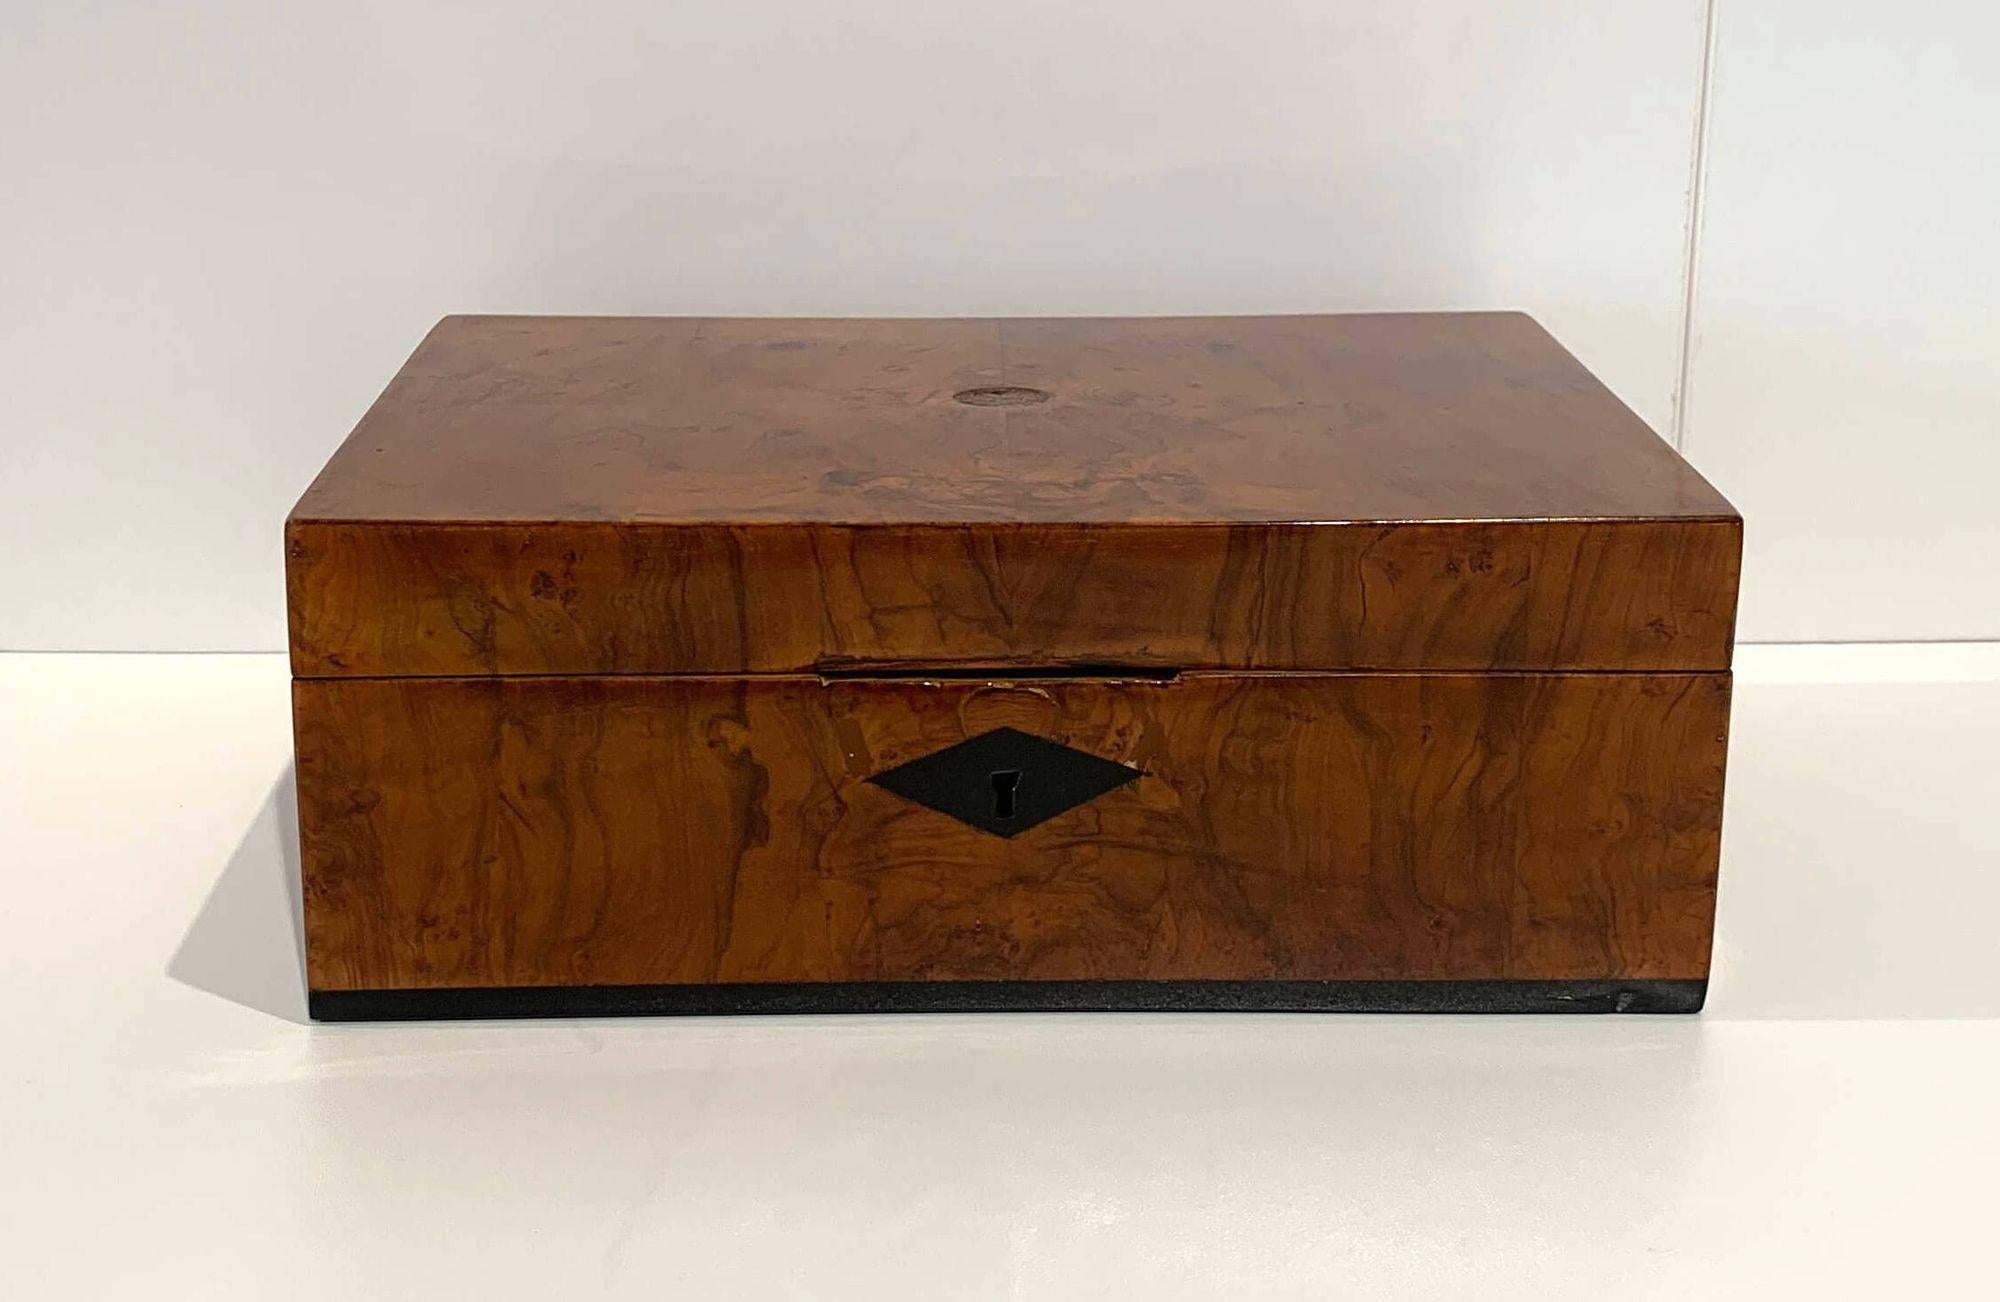 Walnut veneer with ebony ribbon inlay at the lower edge. An imprint in the top center of the lid.
Refinished condition. Polished with shellac by hand for a beautiful high-gloss surface.
Dimensions: H 10.5 x W 28 x D 19 cm